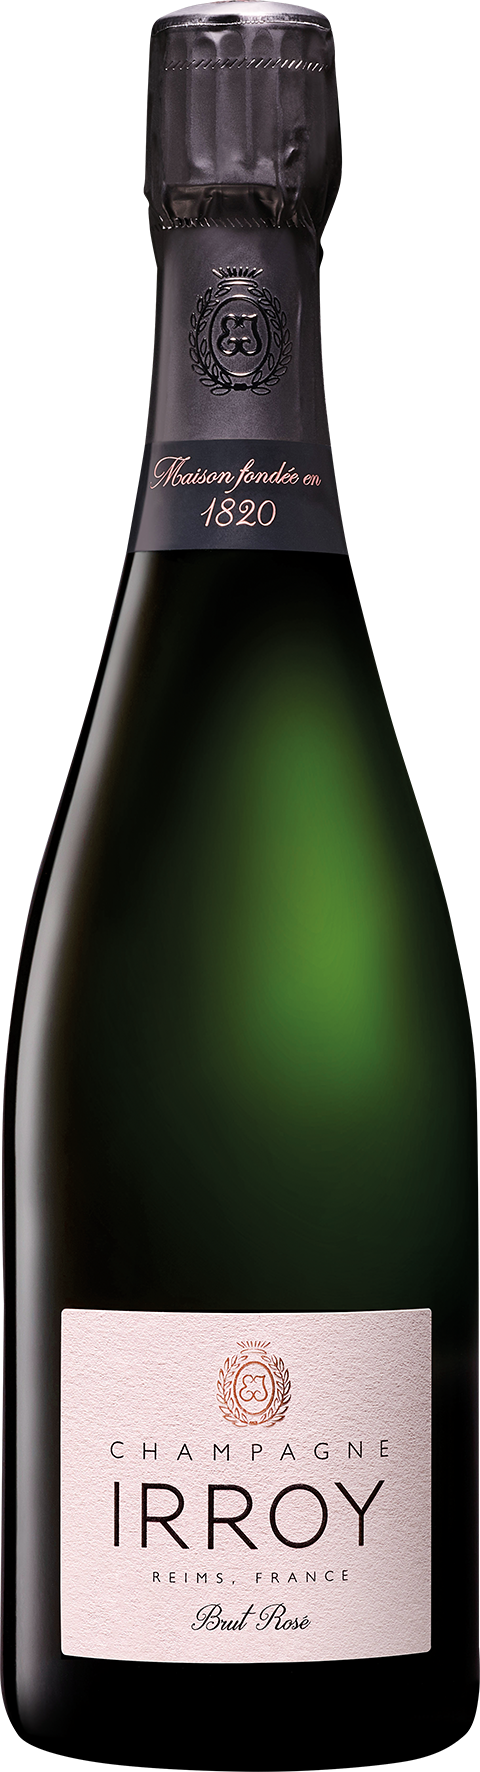 Champagne Irroy Brut Rosé -